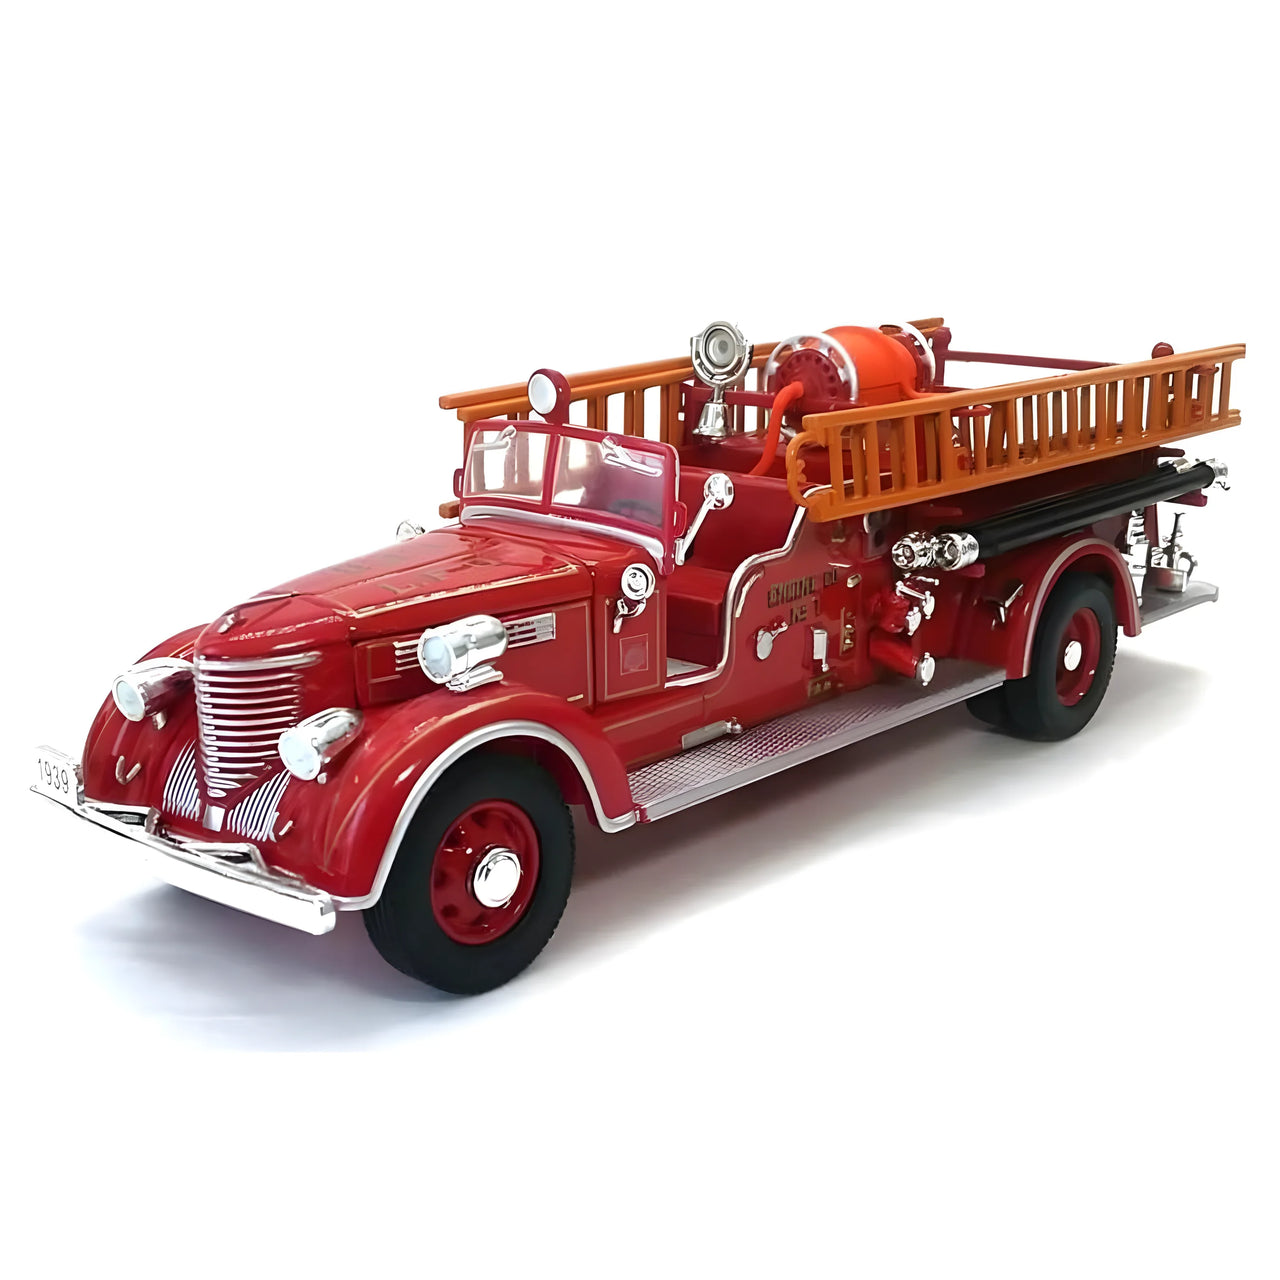 32400 Packard Fire Truck 1939 Scale 1:32 (Discontinued Model)